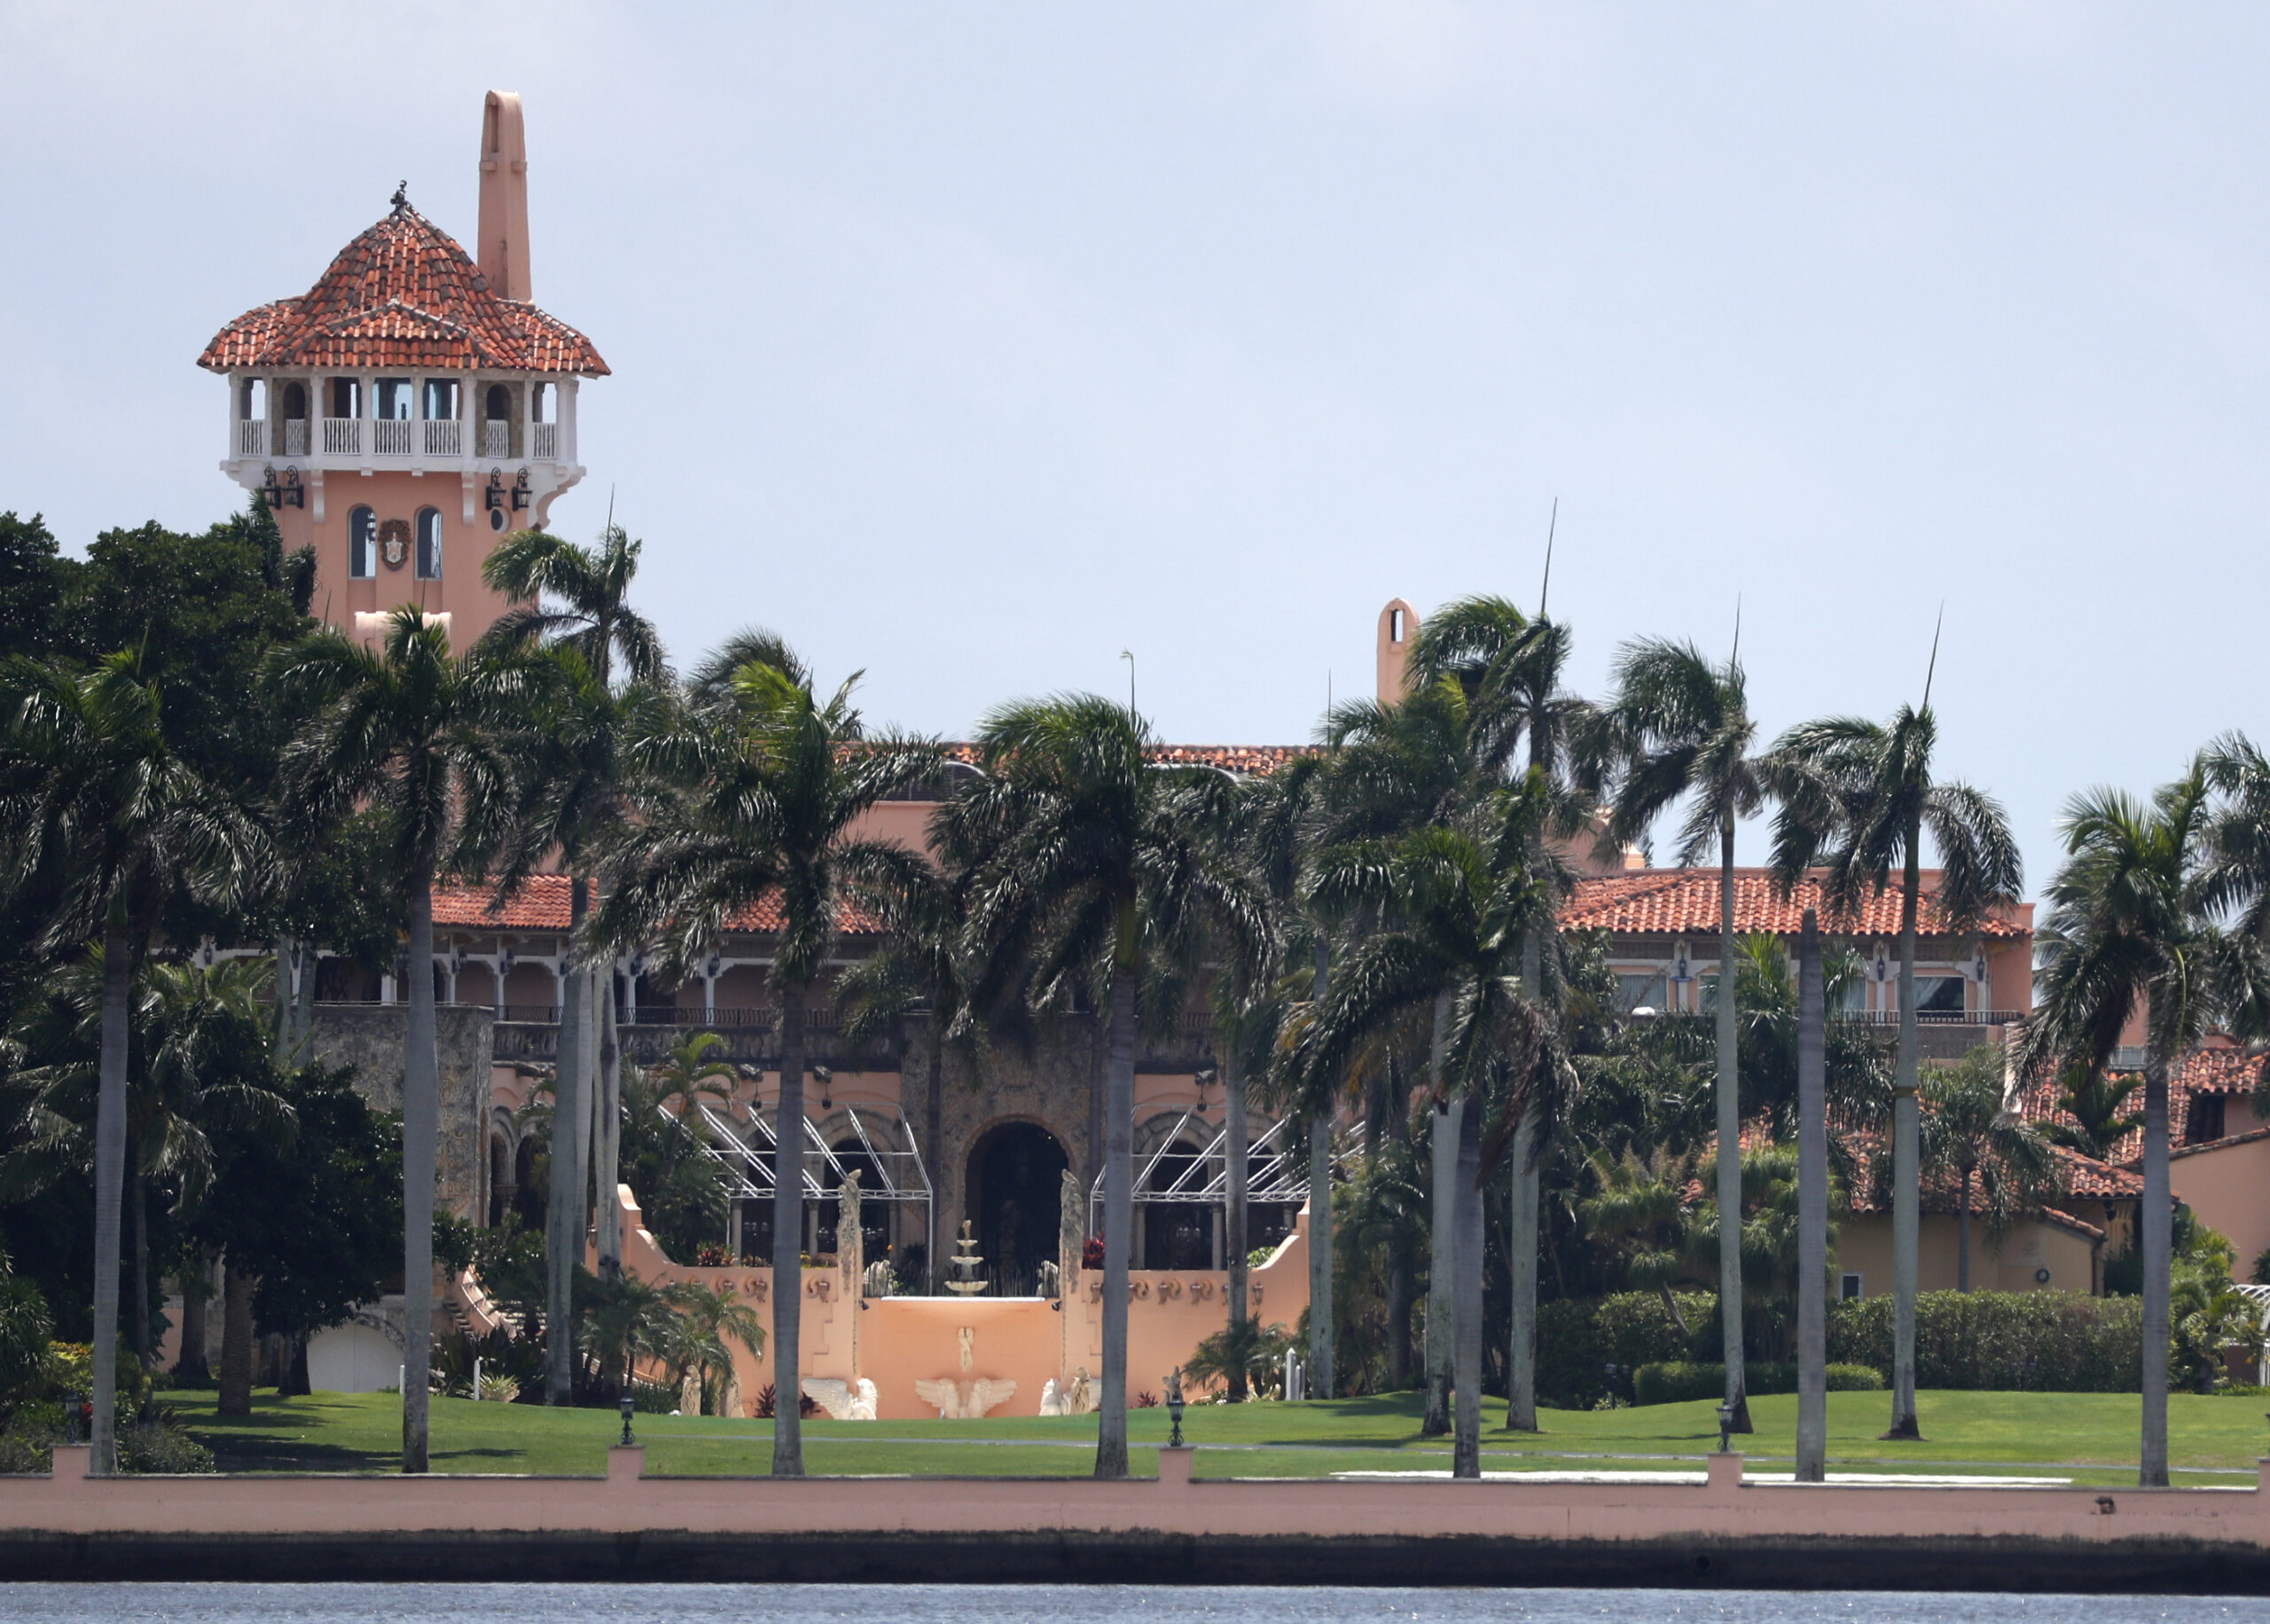 FILE - President Donald Trump's Mar-a-Lago estate is shown on July 10, 2019, in Palm Beach, Fla. Former President Donald Trump says the FBI is conducting a search of his Mar-a-Lago estate. Spokespeople for the FBI and the Justice Department did not return messages seeking comment Monday, Aug. 8, 2022. (AP Photo/Wilfredo Lee, File)